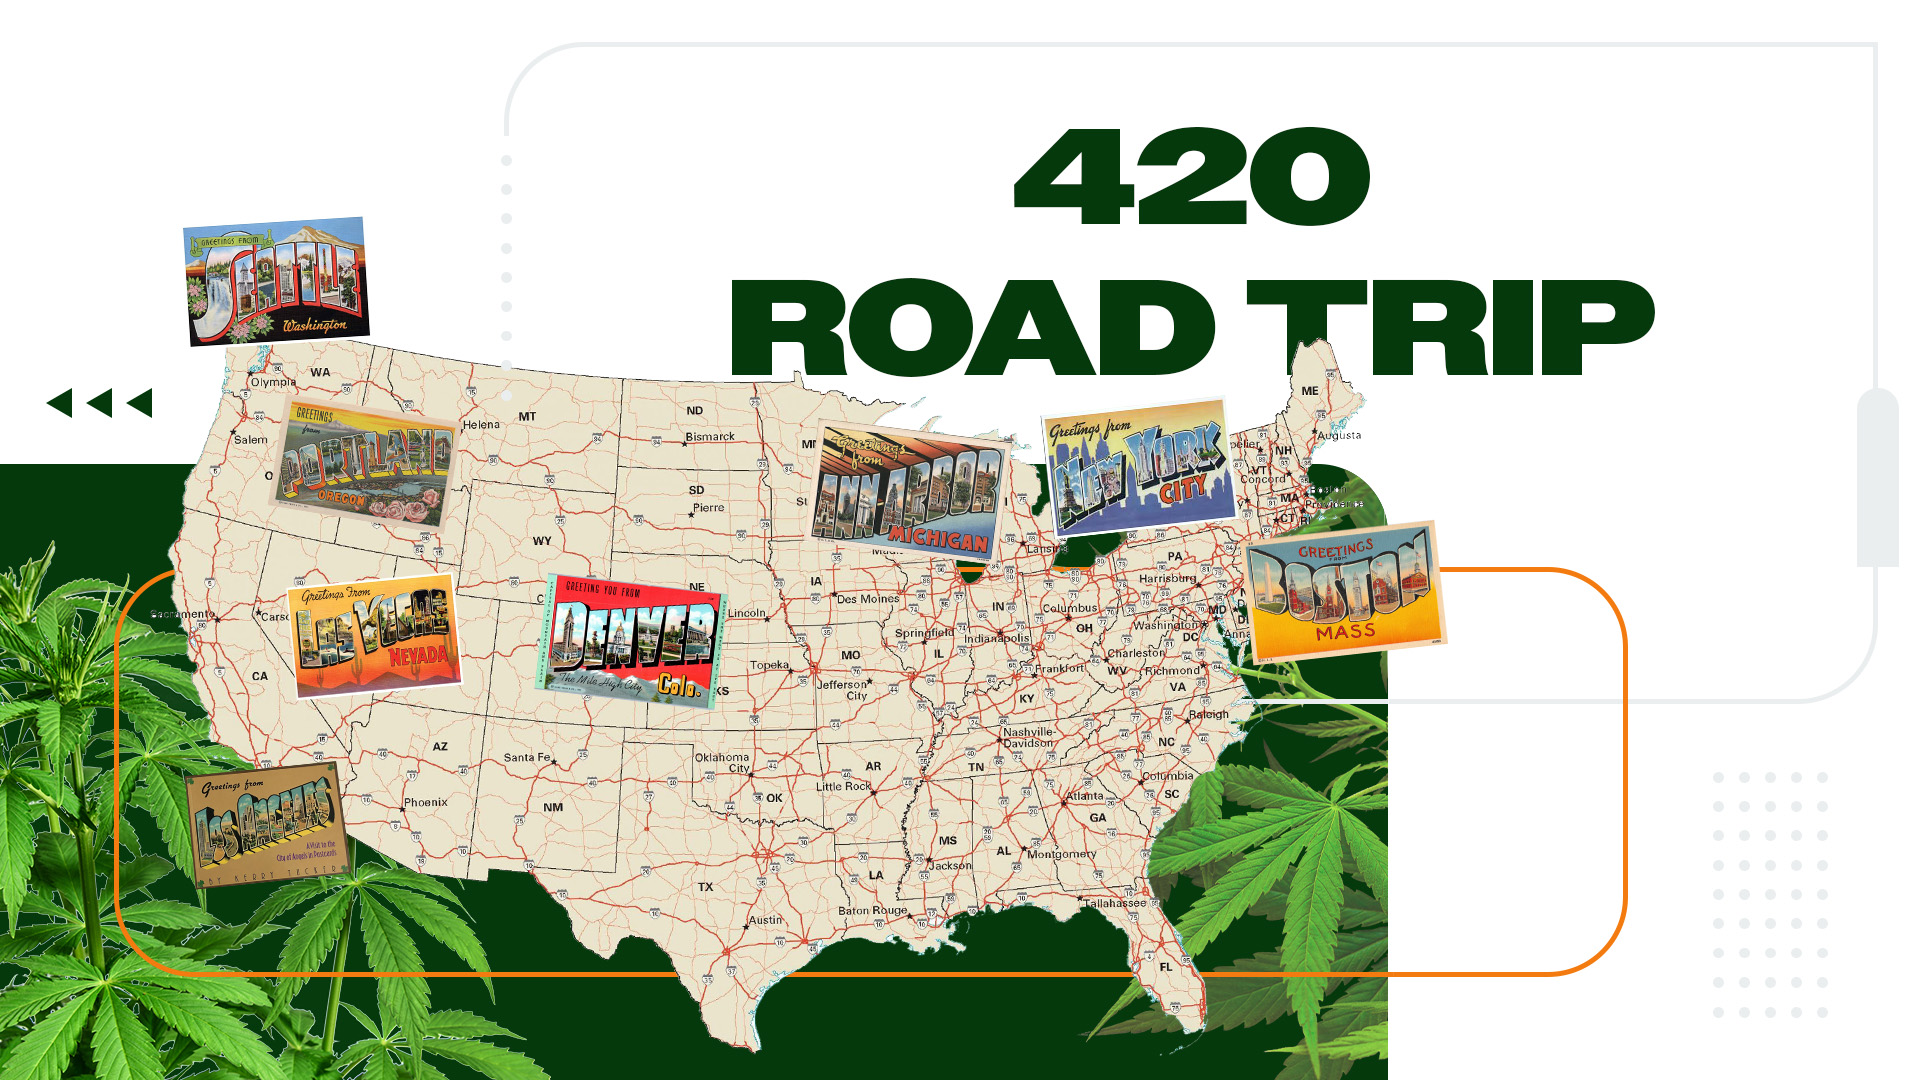 Cannabis Tourism Guide: The Ultimate U.S. Cannabis Road Trip